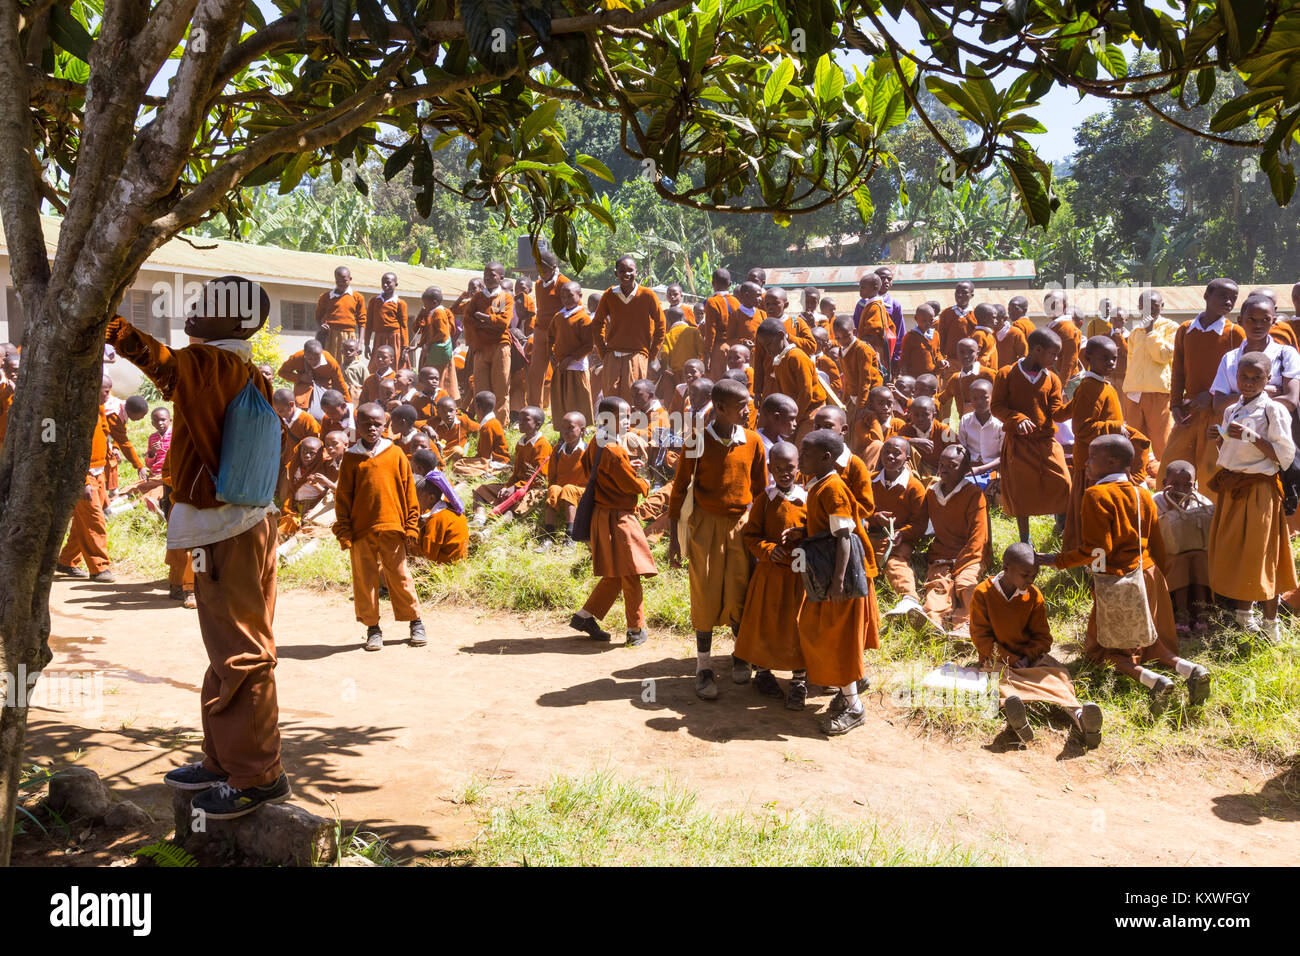 Children in uniforms playing in the cortyard of primary school in rural area near Arusha, Tanzania, Africa. Stock Photo